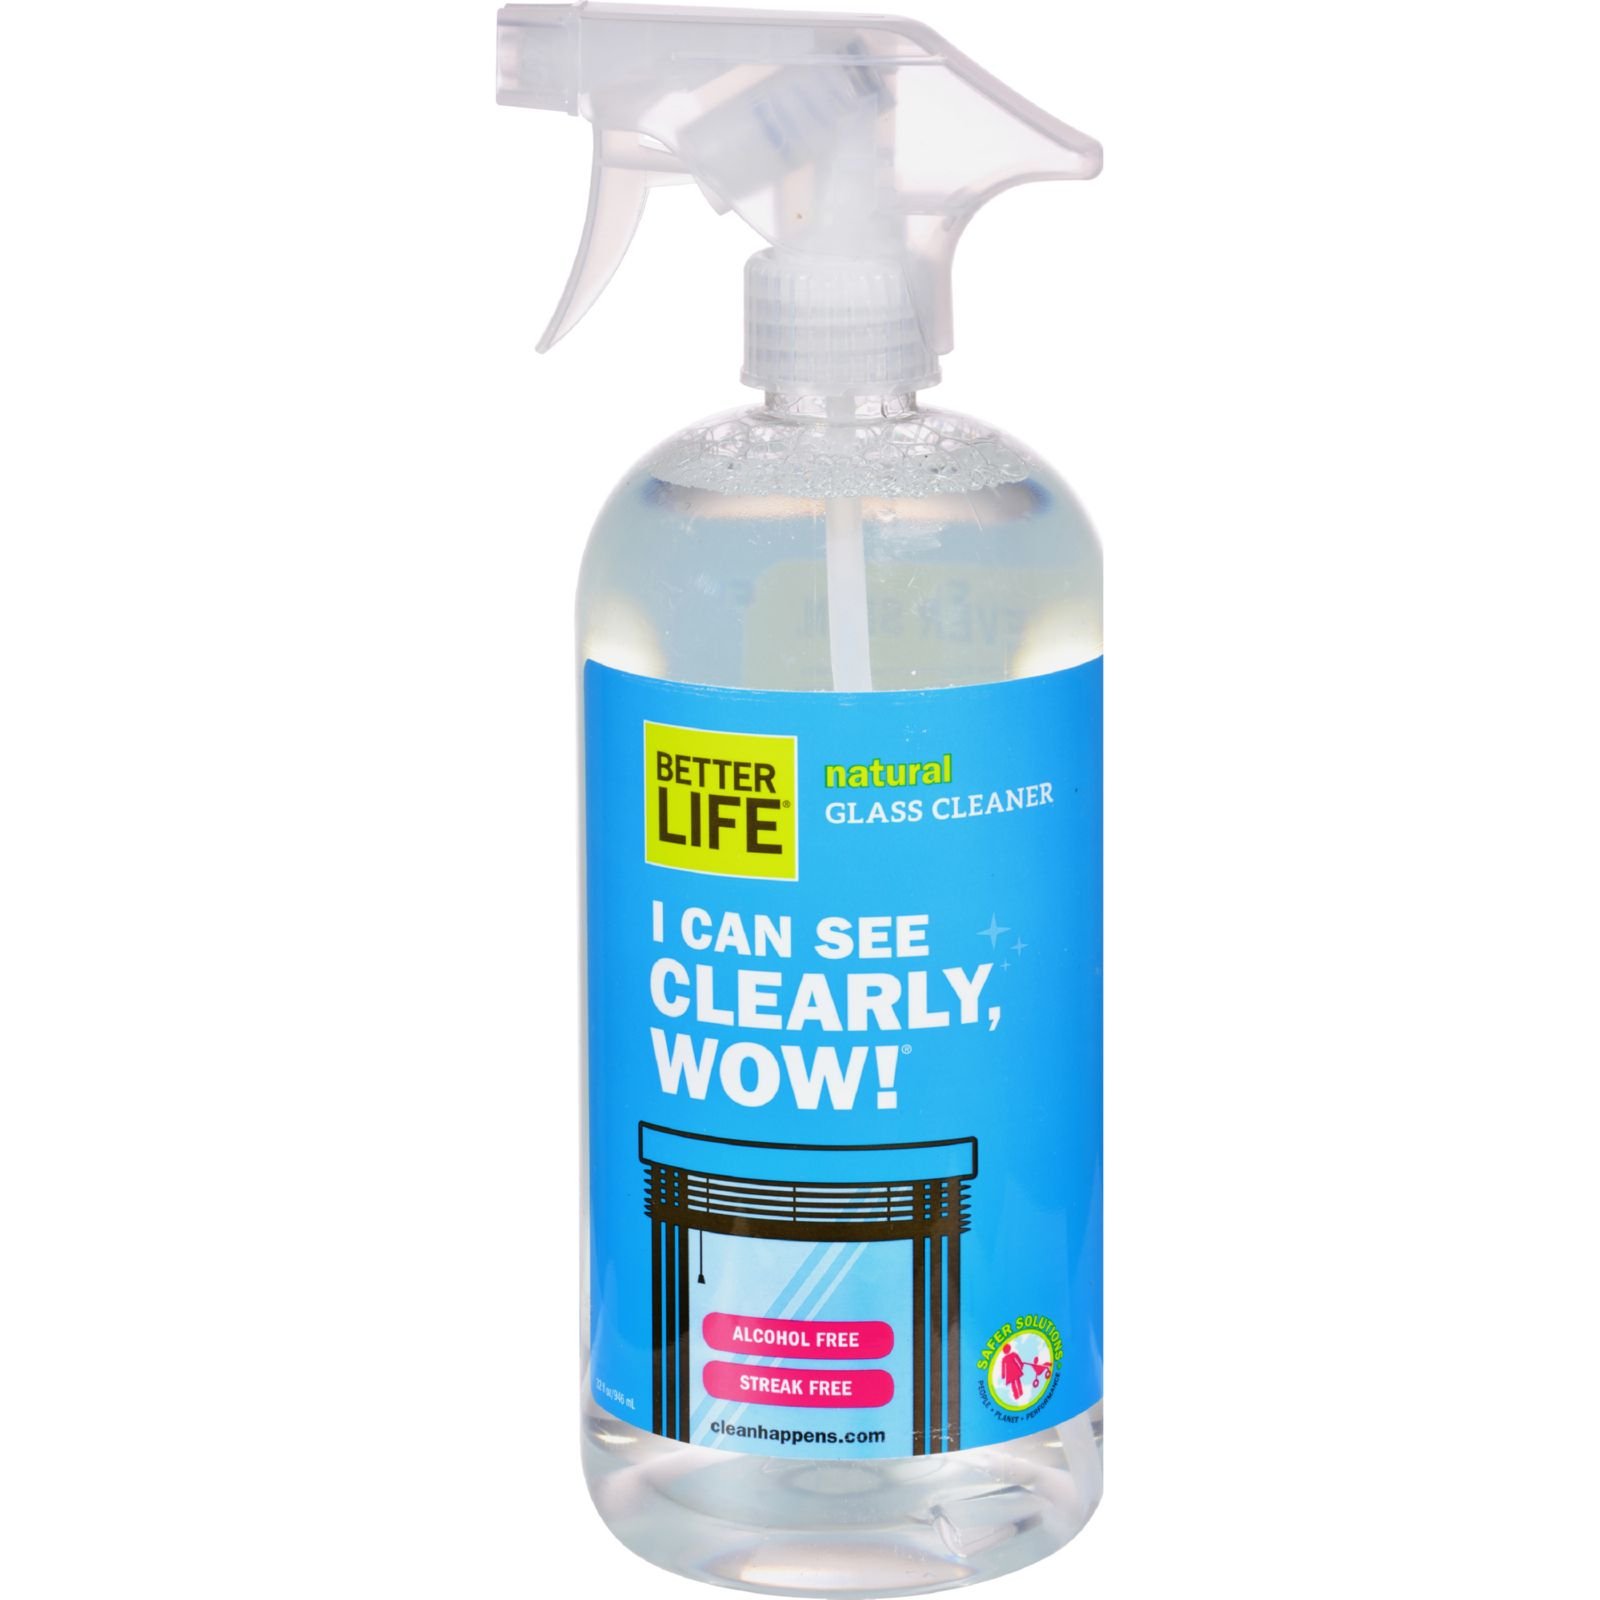 Better Life See Clearly Glass Cleaner - Natural - Alcohol Free - Streak Free - 32 fl oz (Pack of 4)